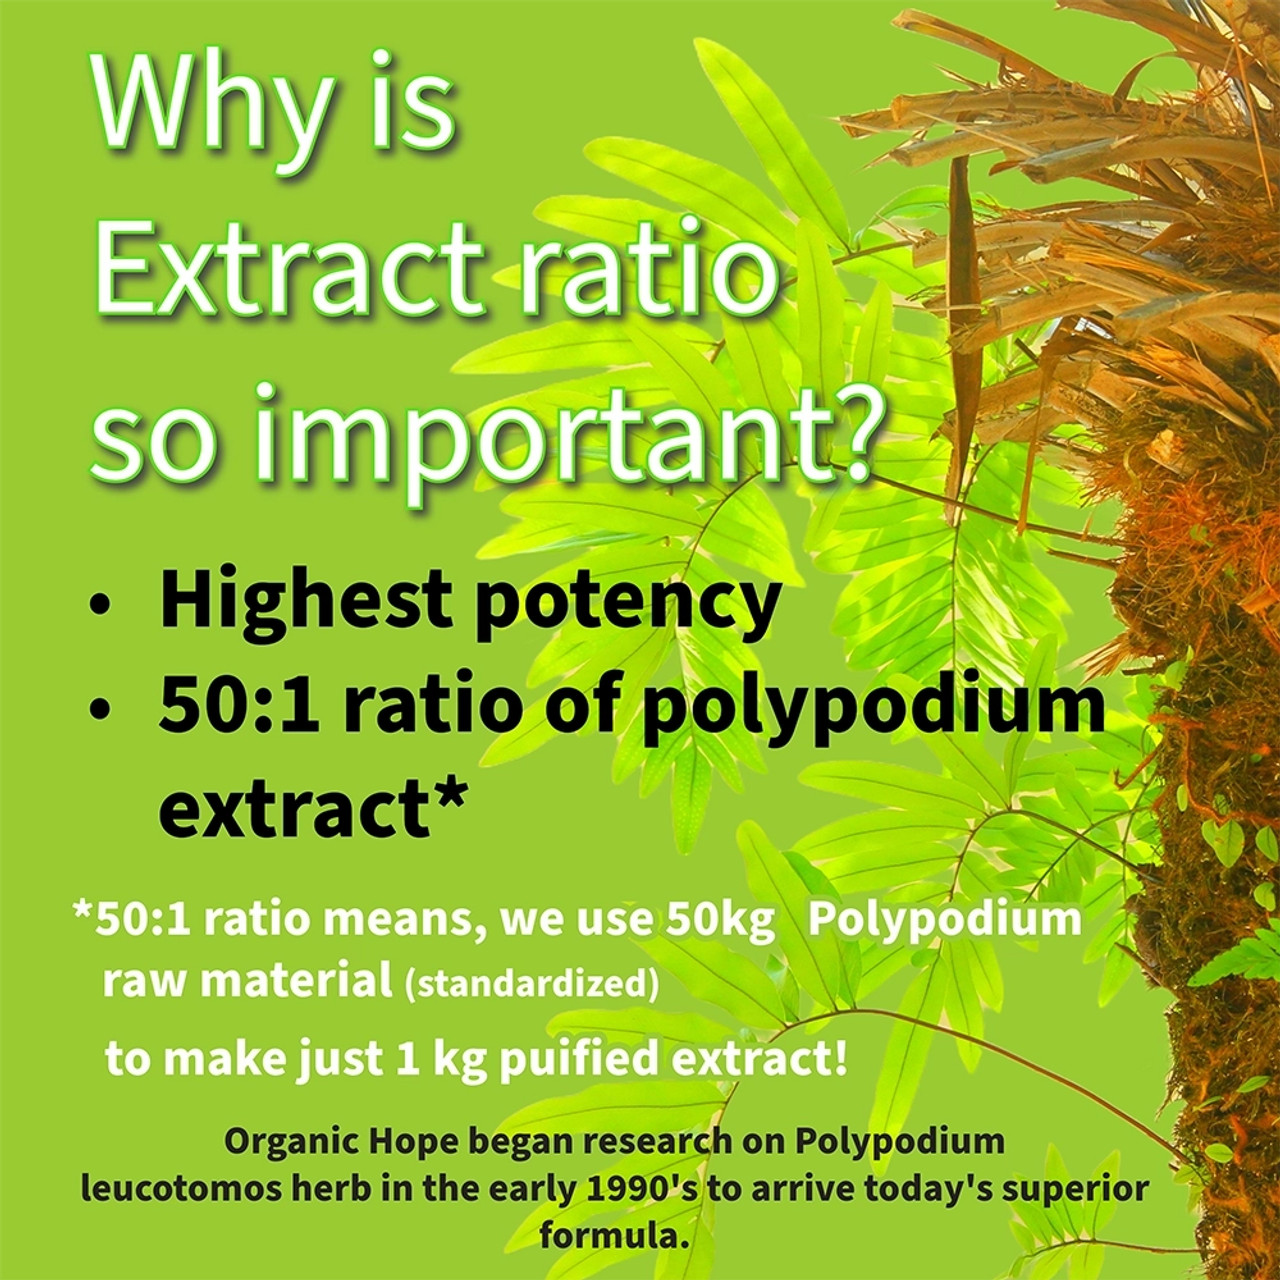 WHY IS THE EXTRACT RATIO OF POLYPODIUM LEUCOTOMOS SO IMPORTANT? The 50:1 ratio means we start with 50kg of Polypodium raw material (standardized) to end up with just 1kg of concentrated, purified extract. This is the highest concentration/potency we have been able to achieve since we began research on Polypodium leucotomos herb in the early 90s.